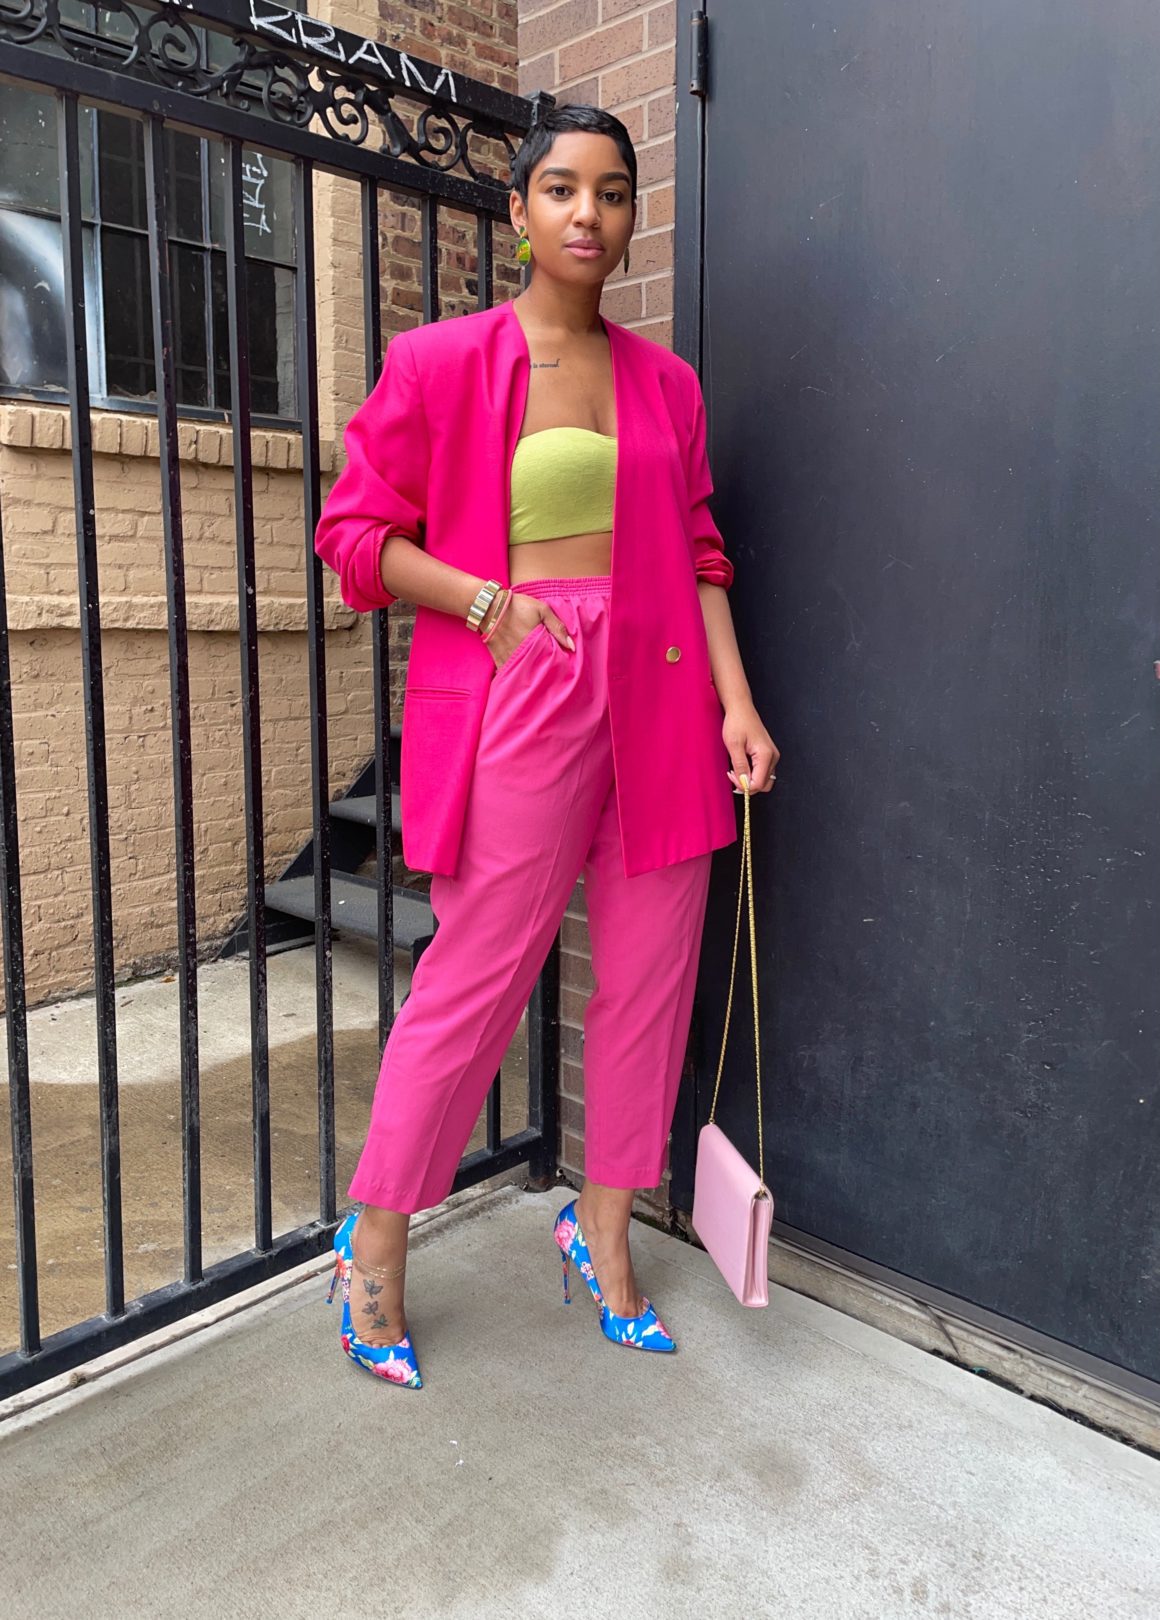 Fashion Bombshell of the Day: Pam from New Jersey – Fashion Bomb Daily